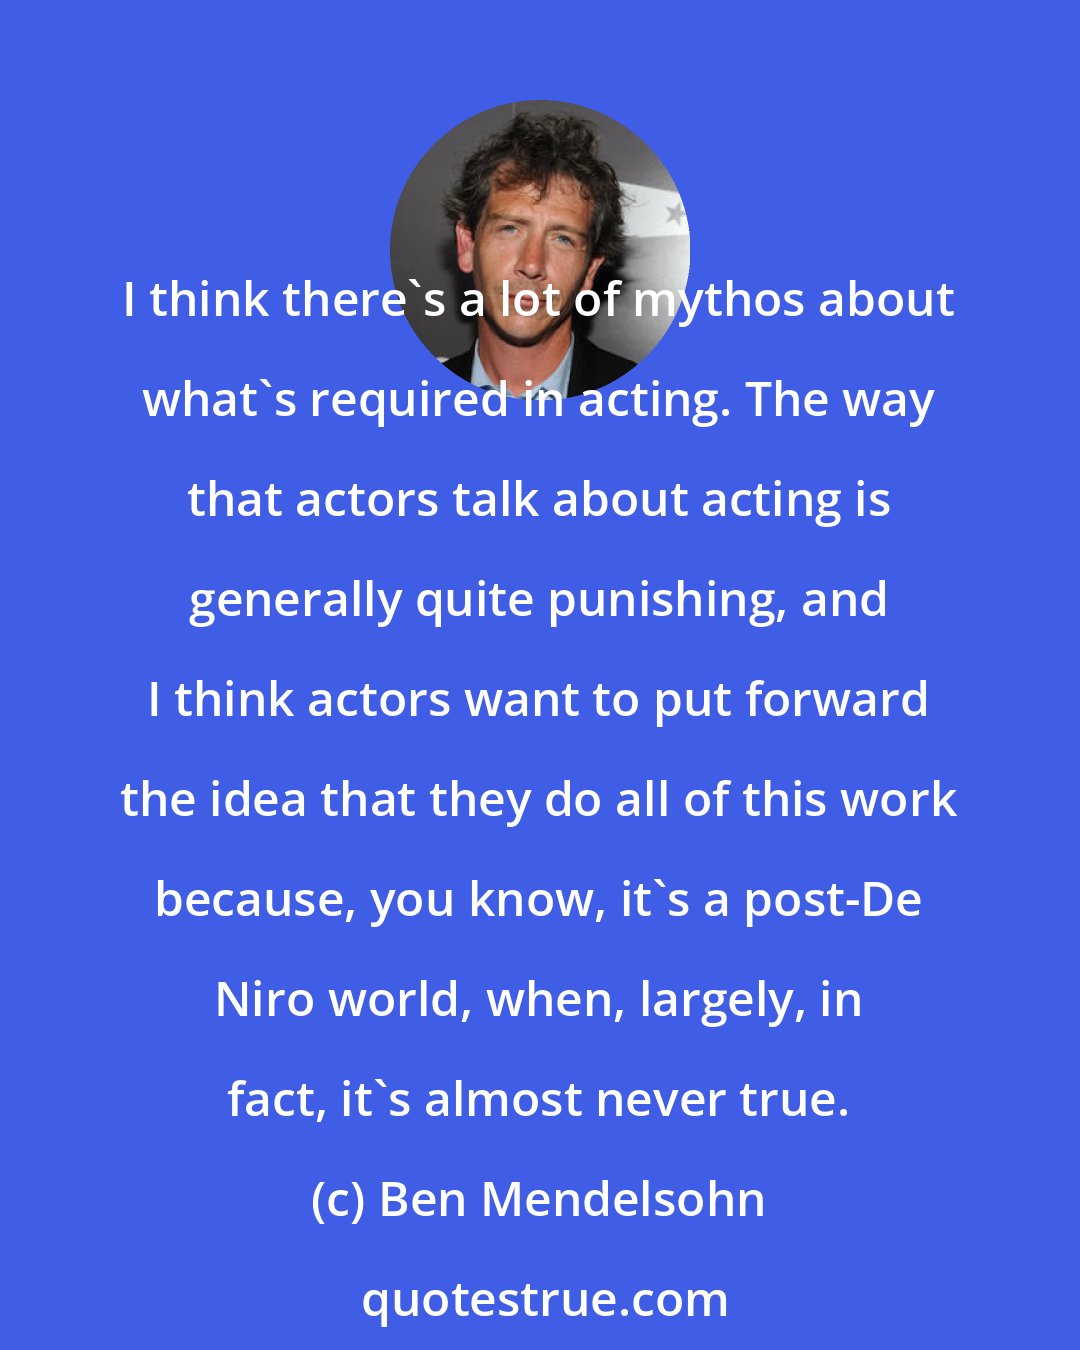 Ben Mendelsohn: I think there's a lot of mythos about what's required in acting. The way that actors talk about acting is generally quite punishing, and I think actors want to put forward the idea that they do all of this work because, you know, it's a post-De Niro world, when, largely, in fact, it's almost never true.